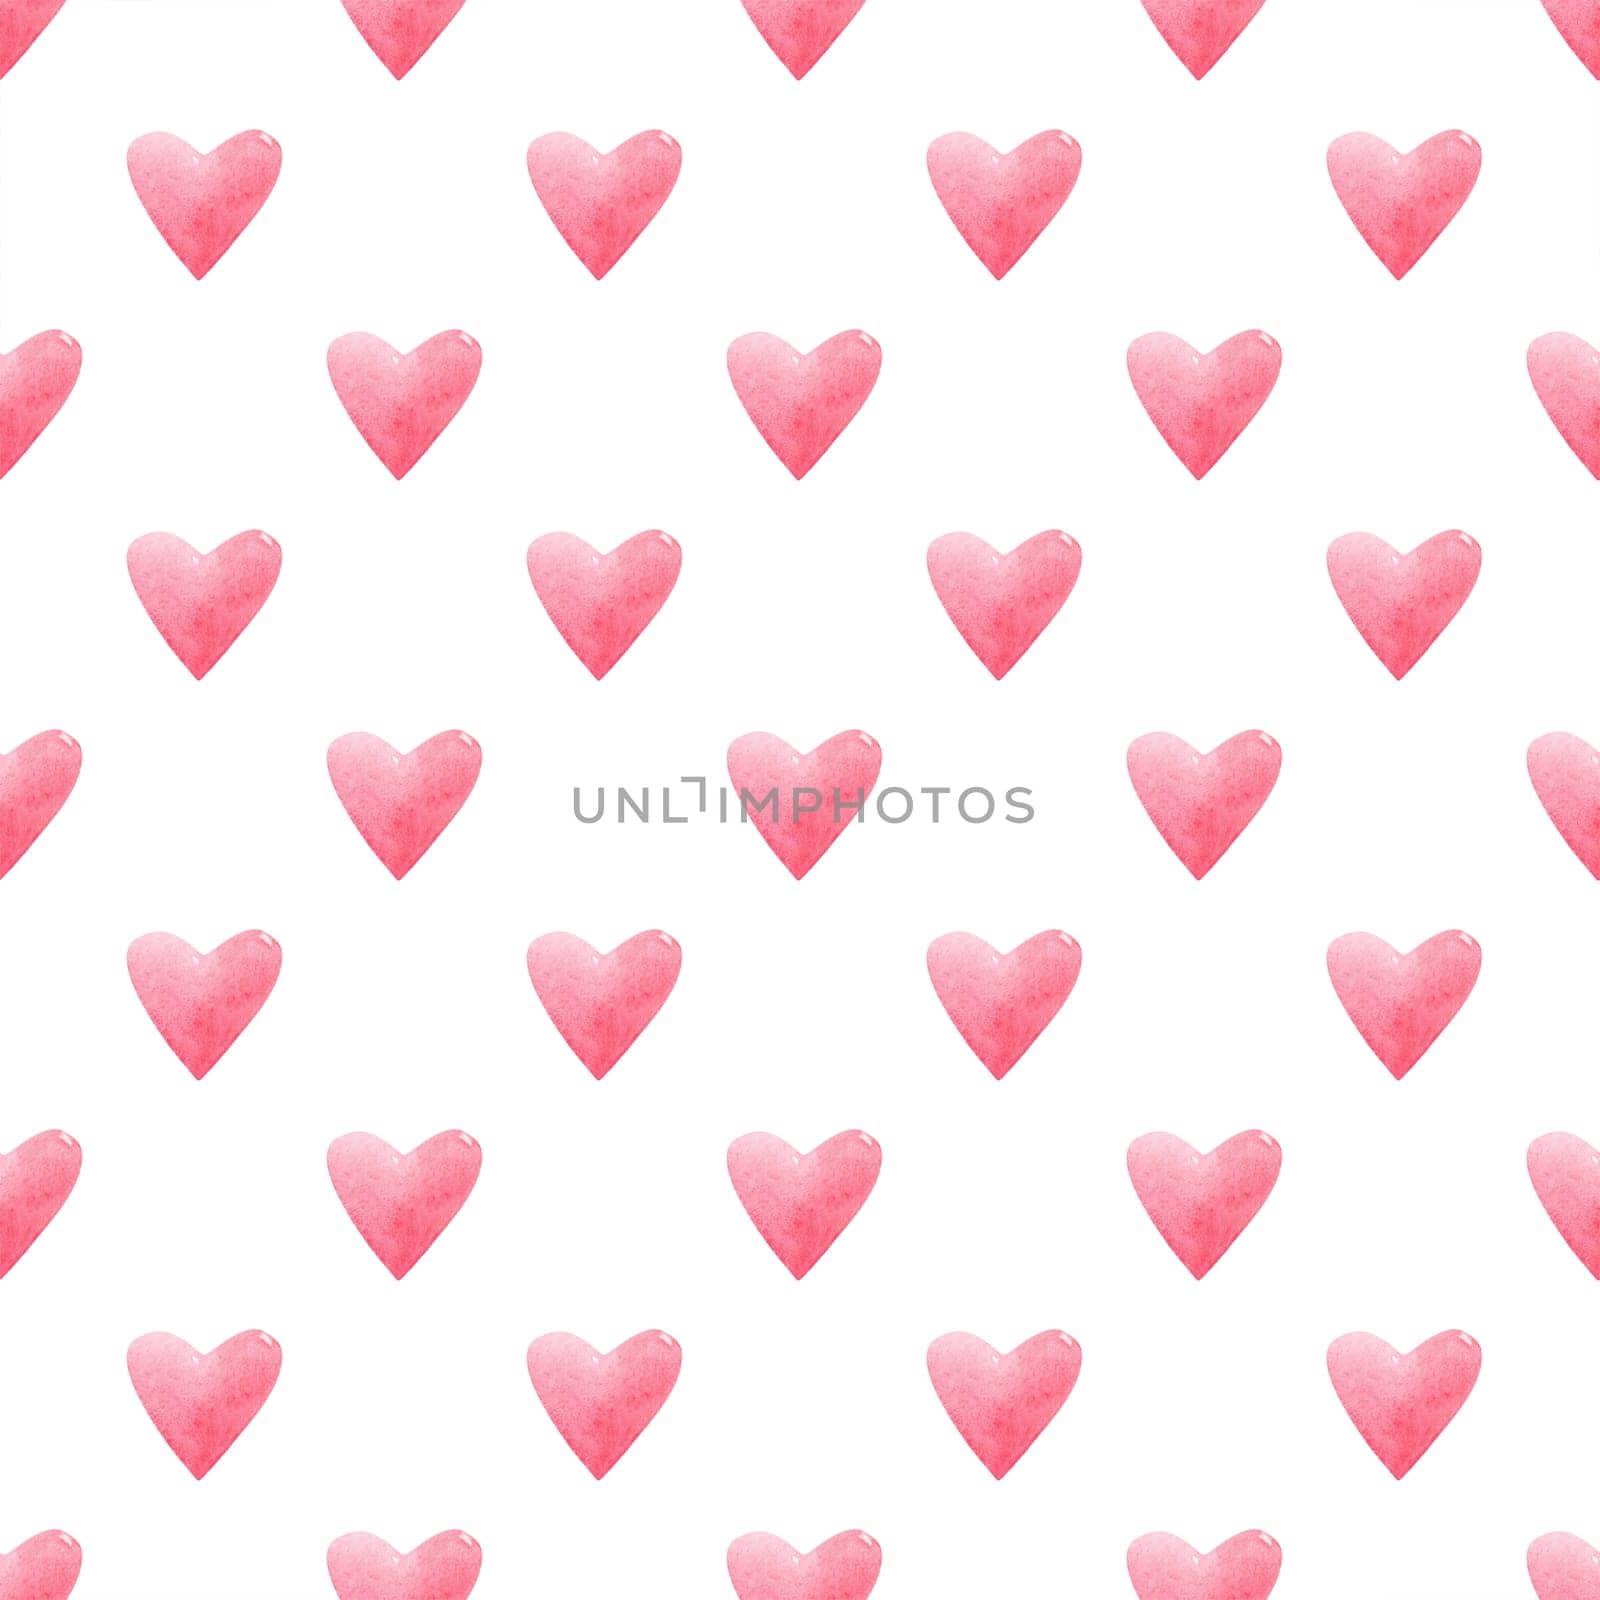 Seamless pattern with bright pink hand painted watercolor hearts. Romantic decorative background perfect for Valentine's day gift paper, wedding decor or fabric textile